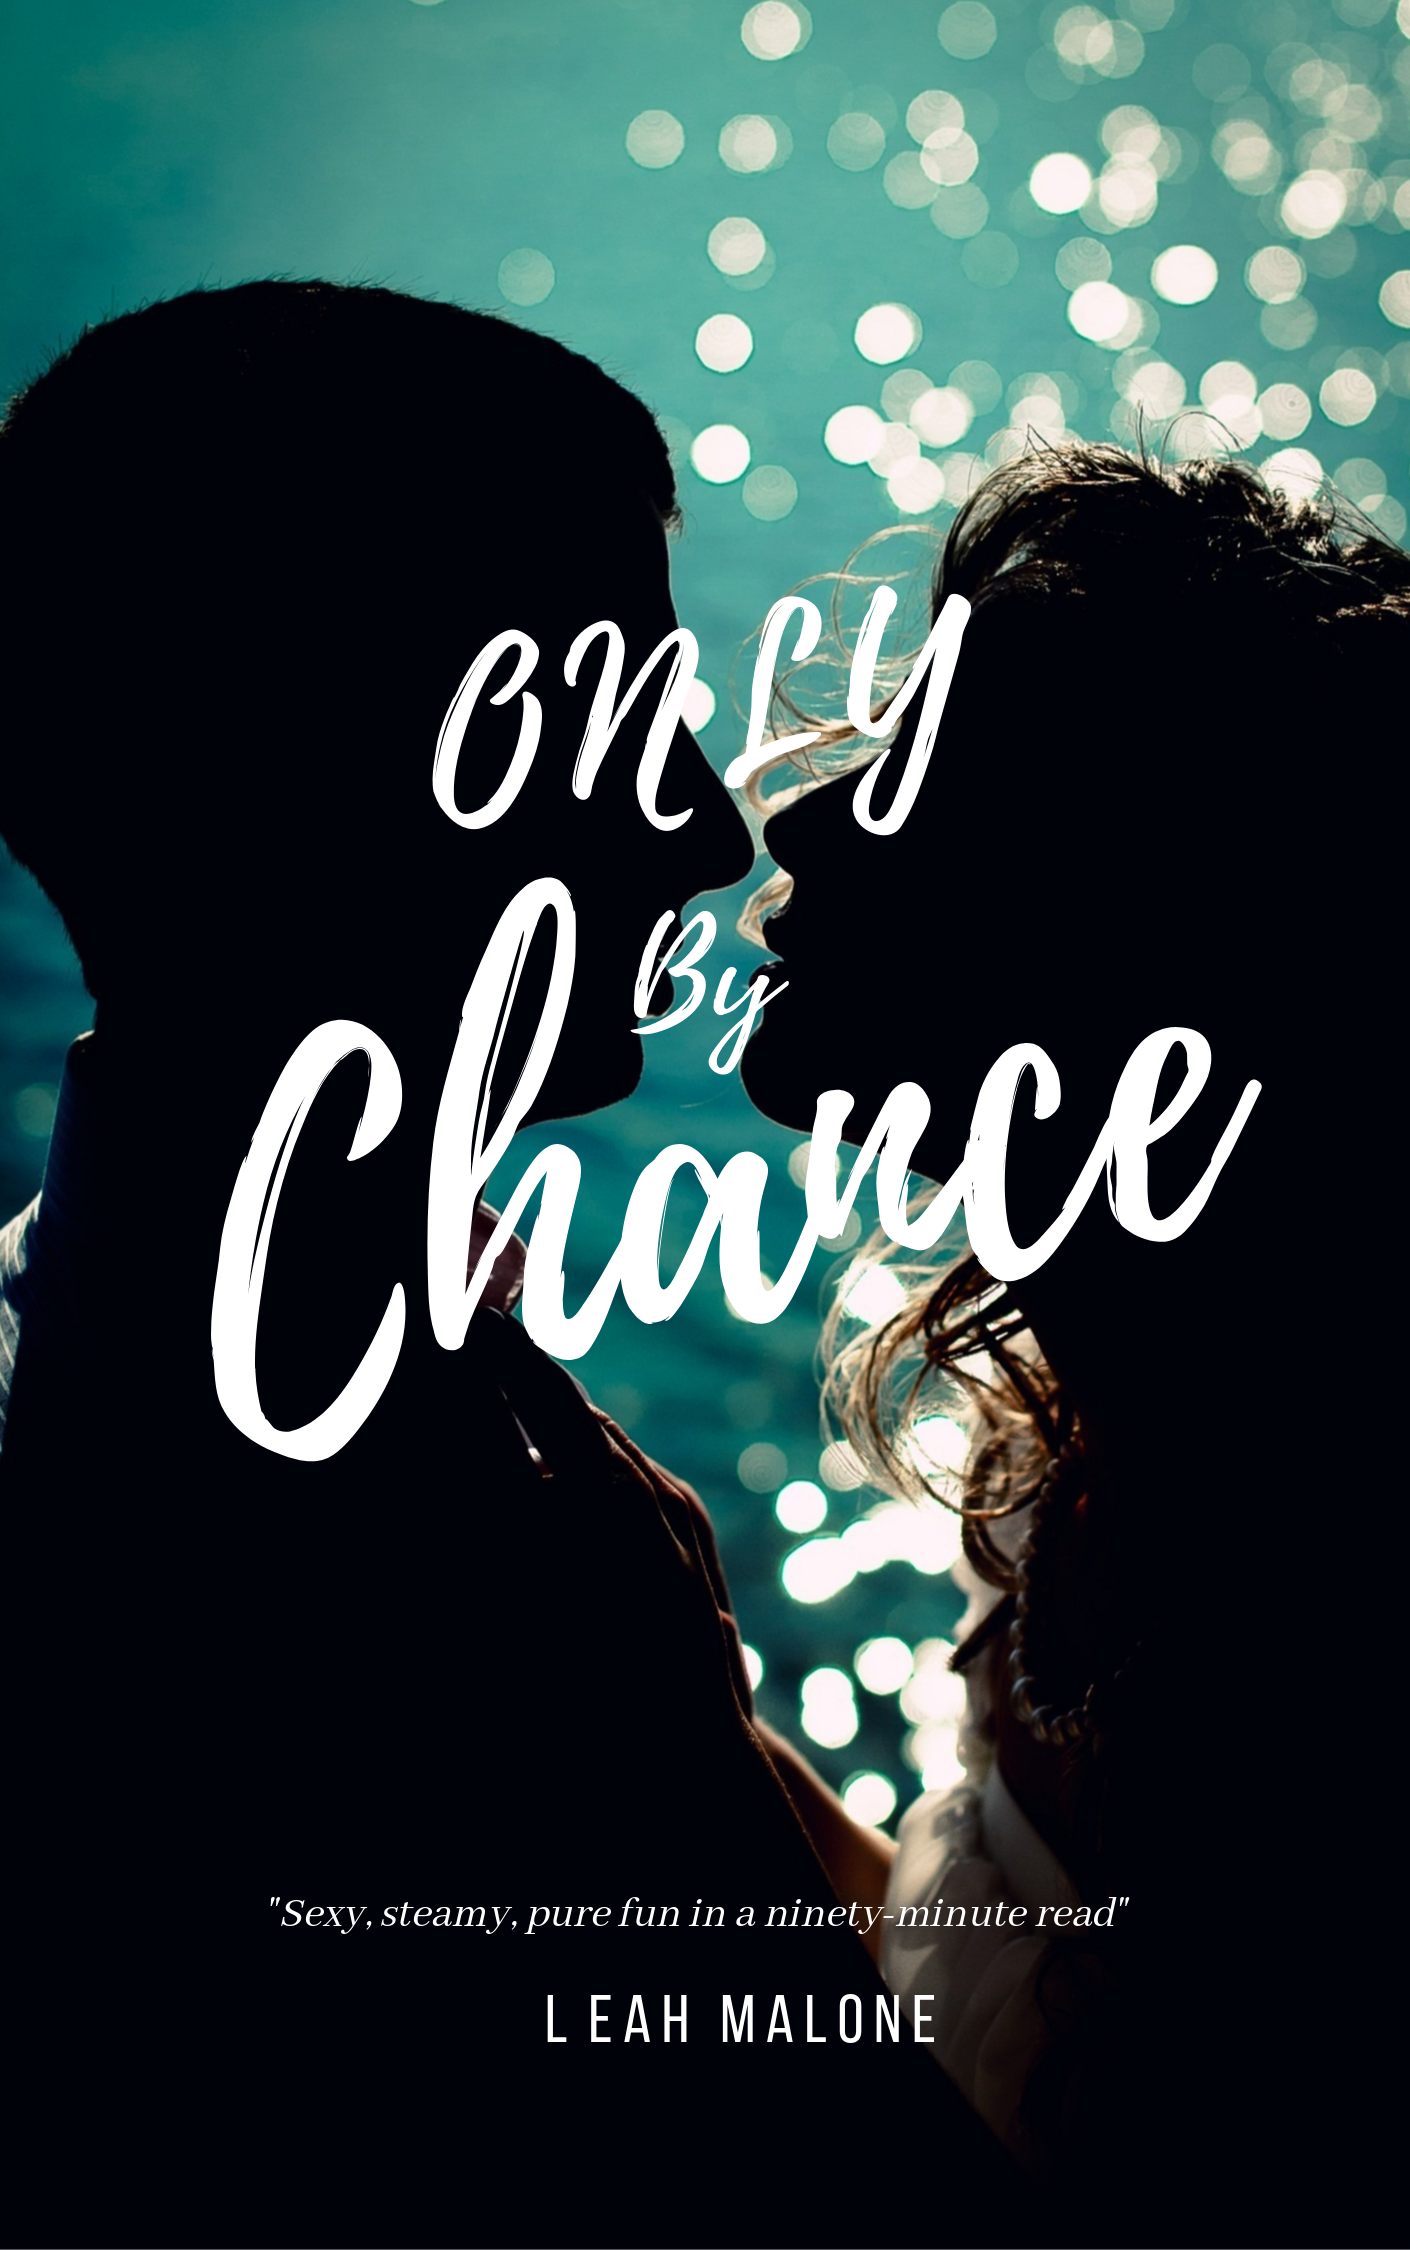 FREE: Only By Chance by Leah Malone